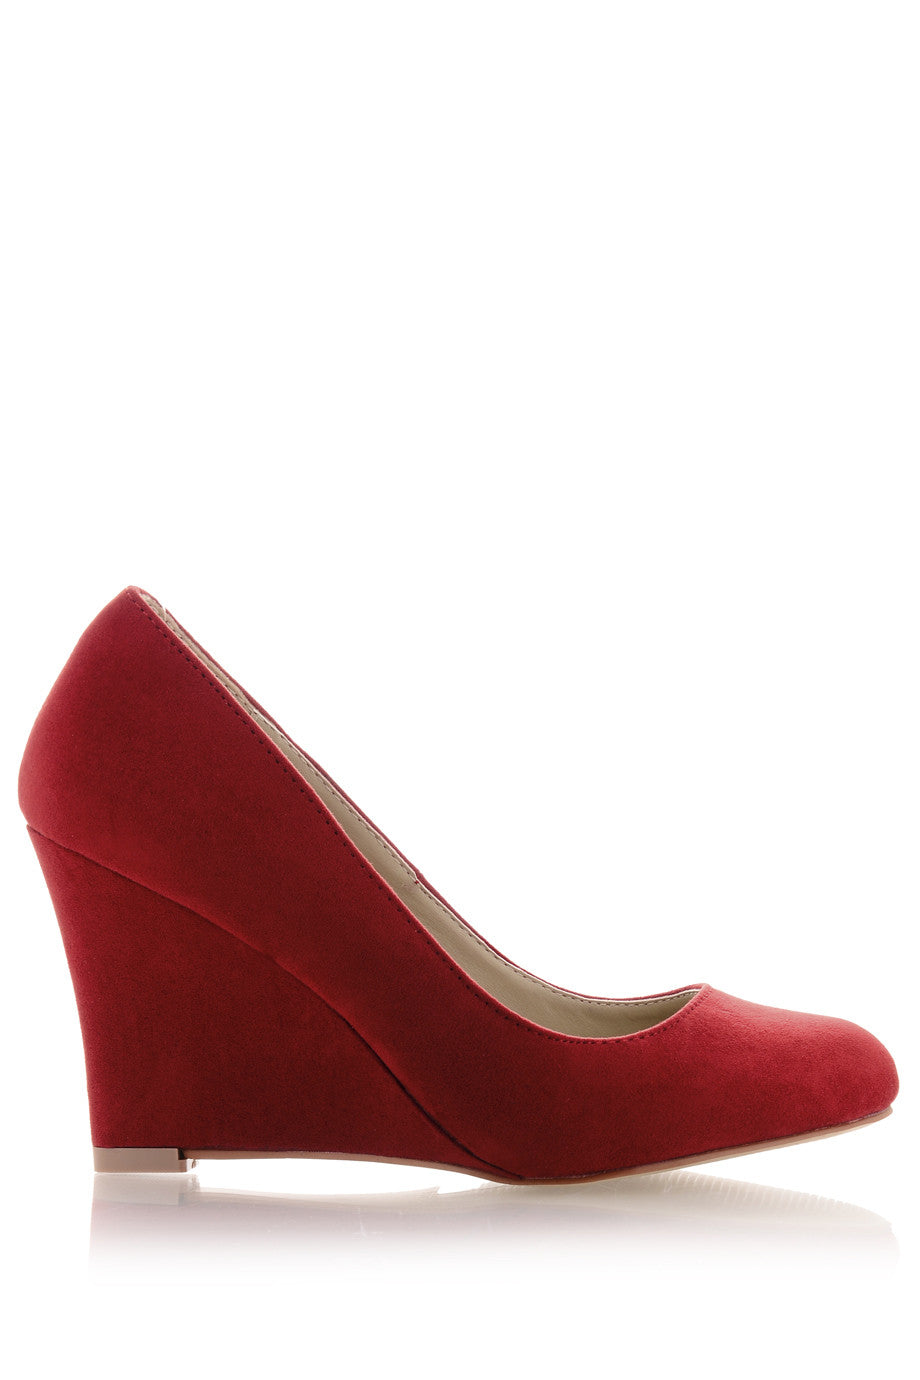 red suede wedge